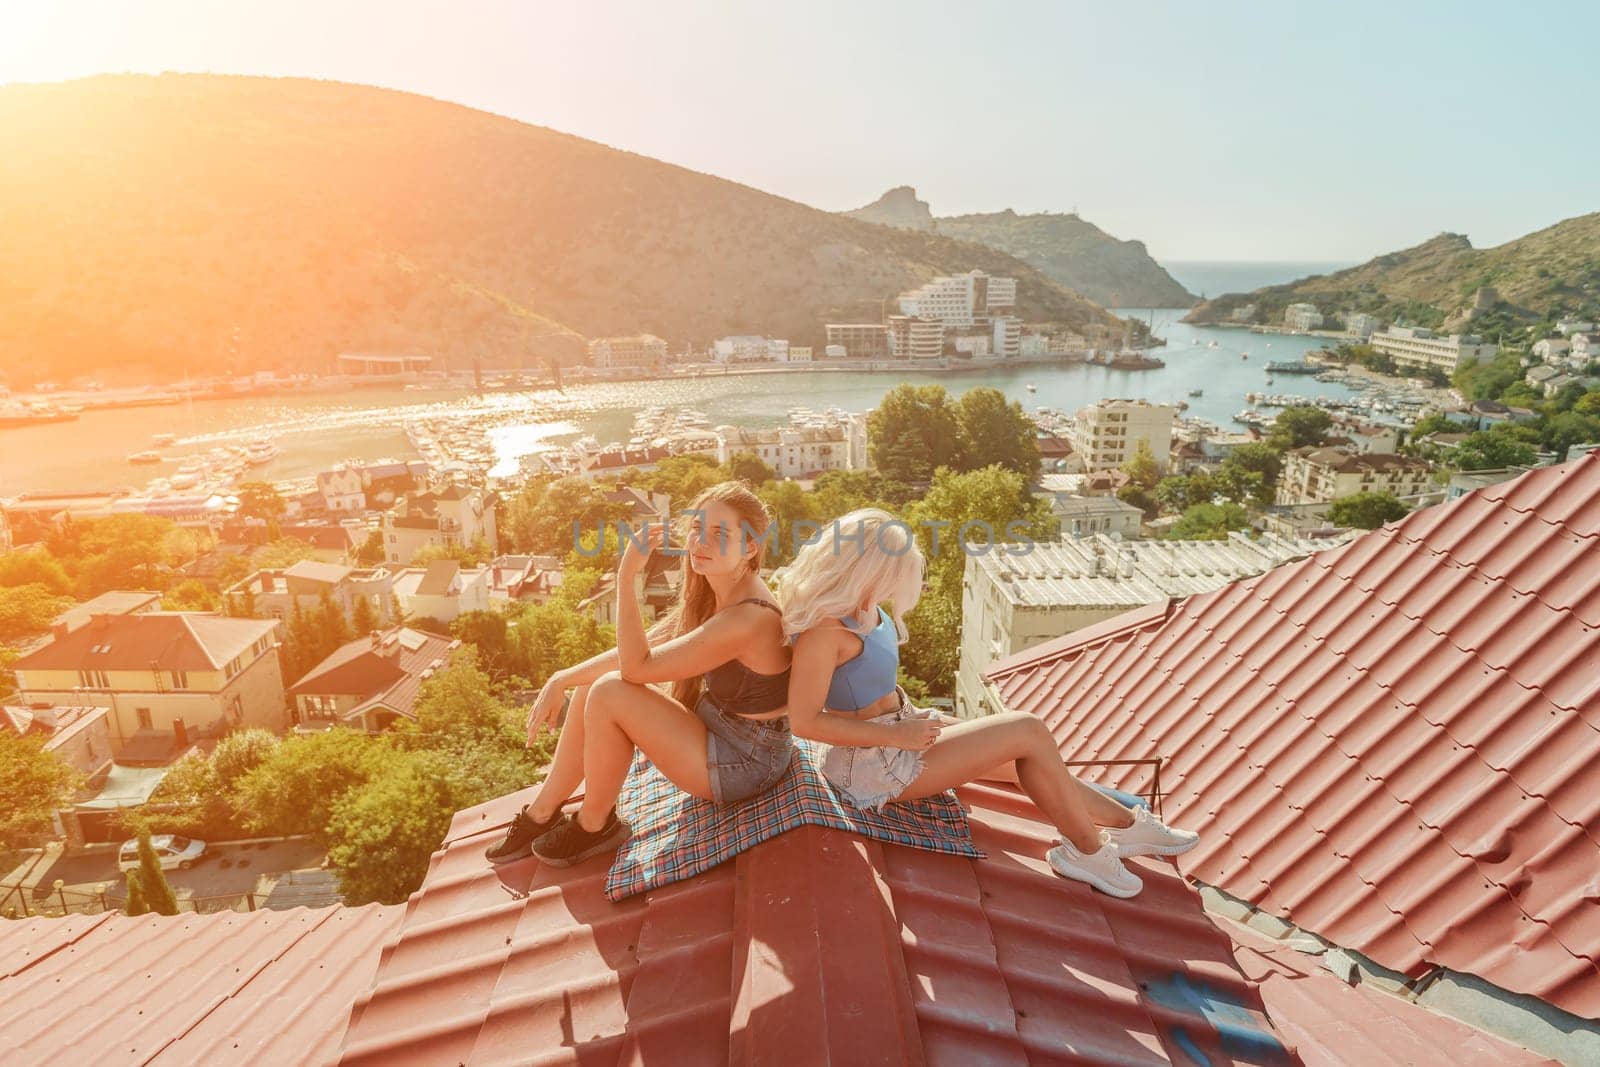 Two women sitting on a red roof, enjoying the view of the town and the sea. Rooftop vantage point. In the background, there are several boats visible on the water, adding to the picturesque scene. by Matiunina